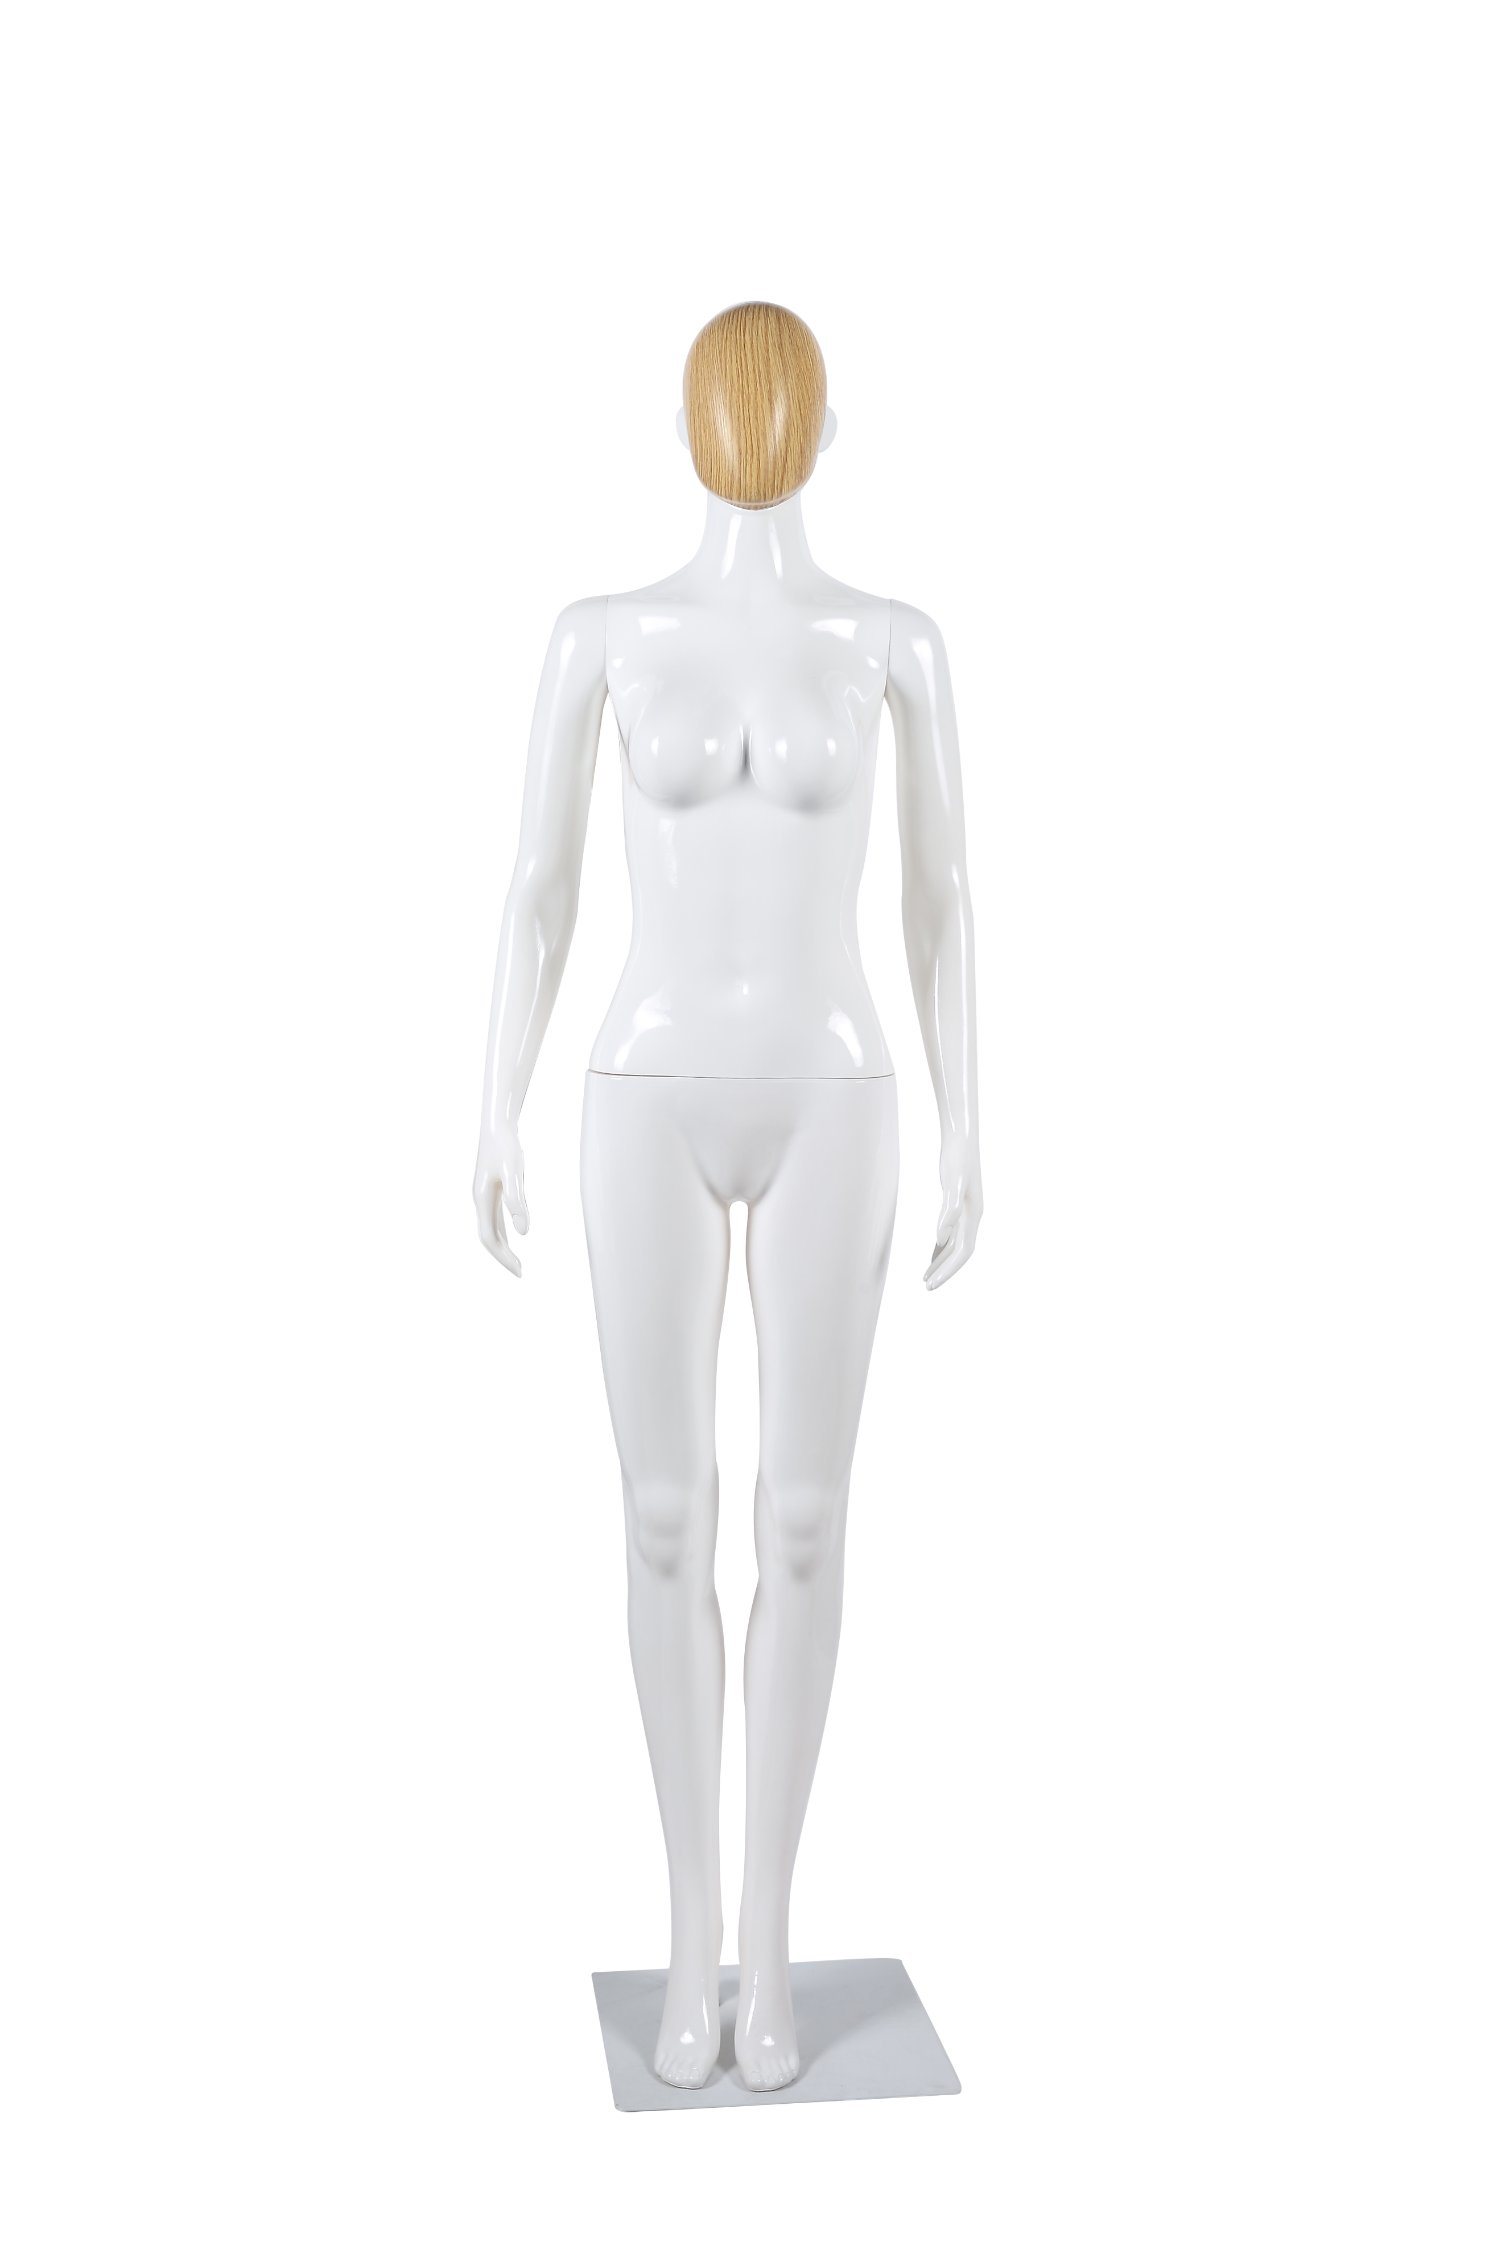 Bright White Female Mannequin with Wood Color Face